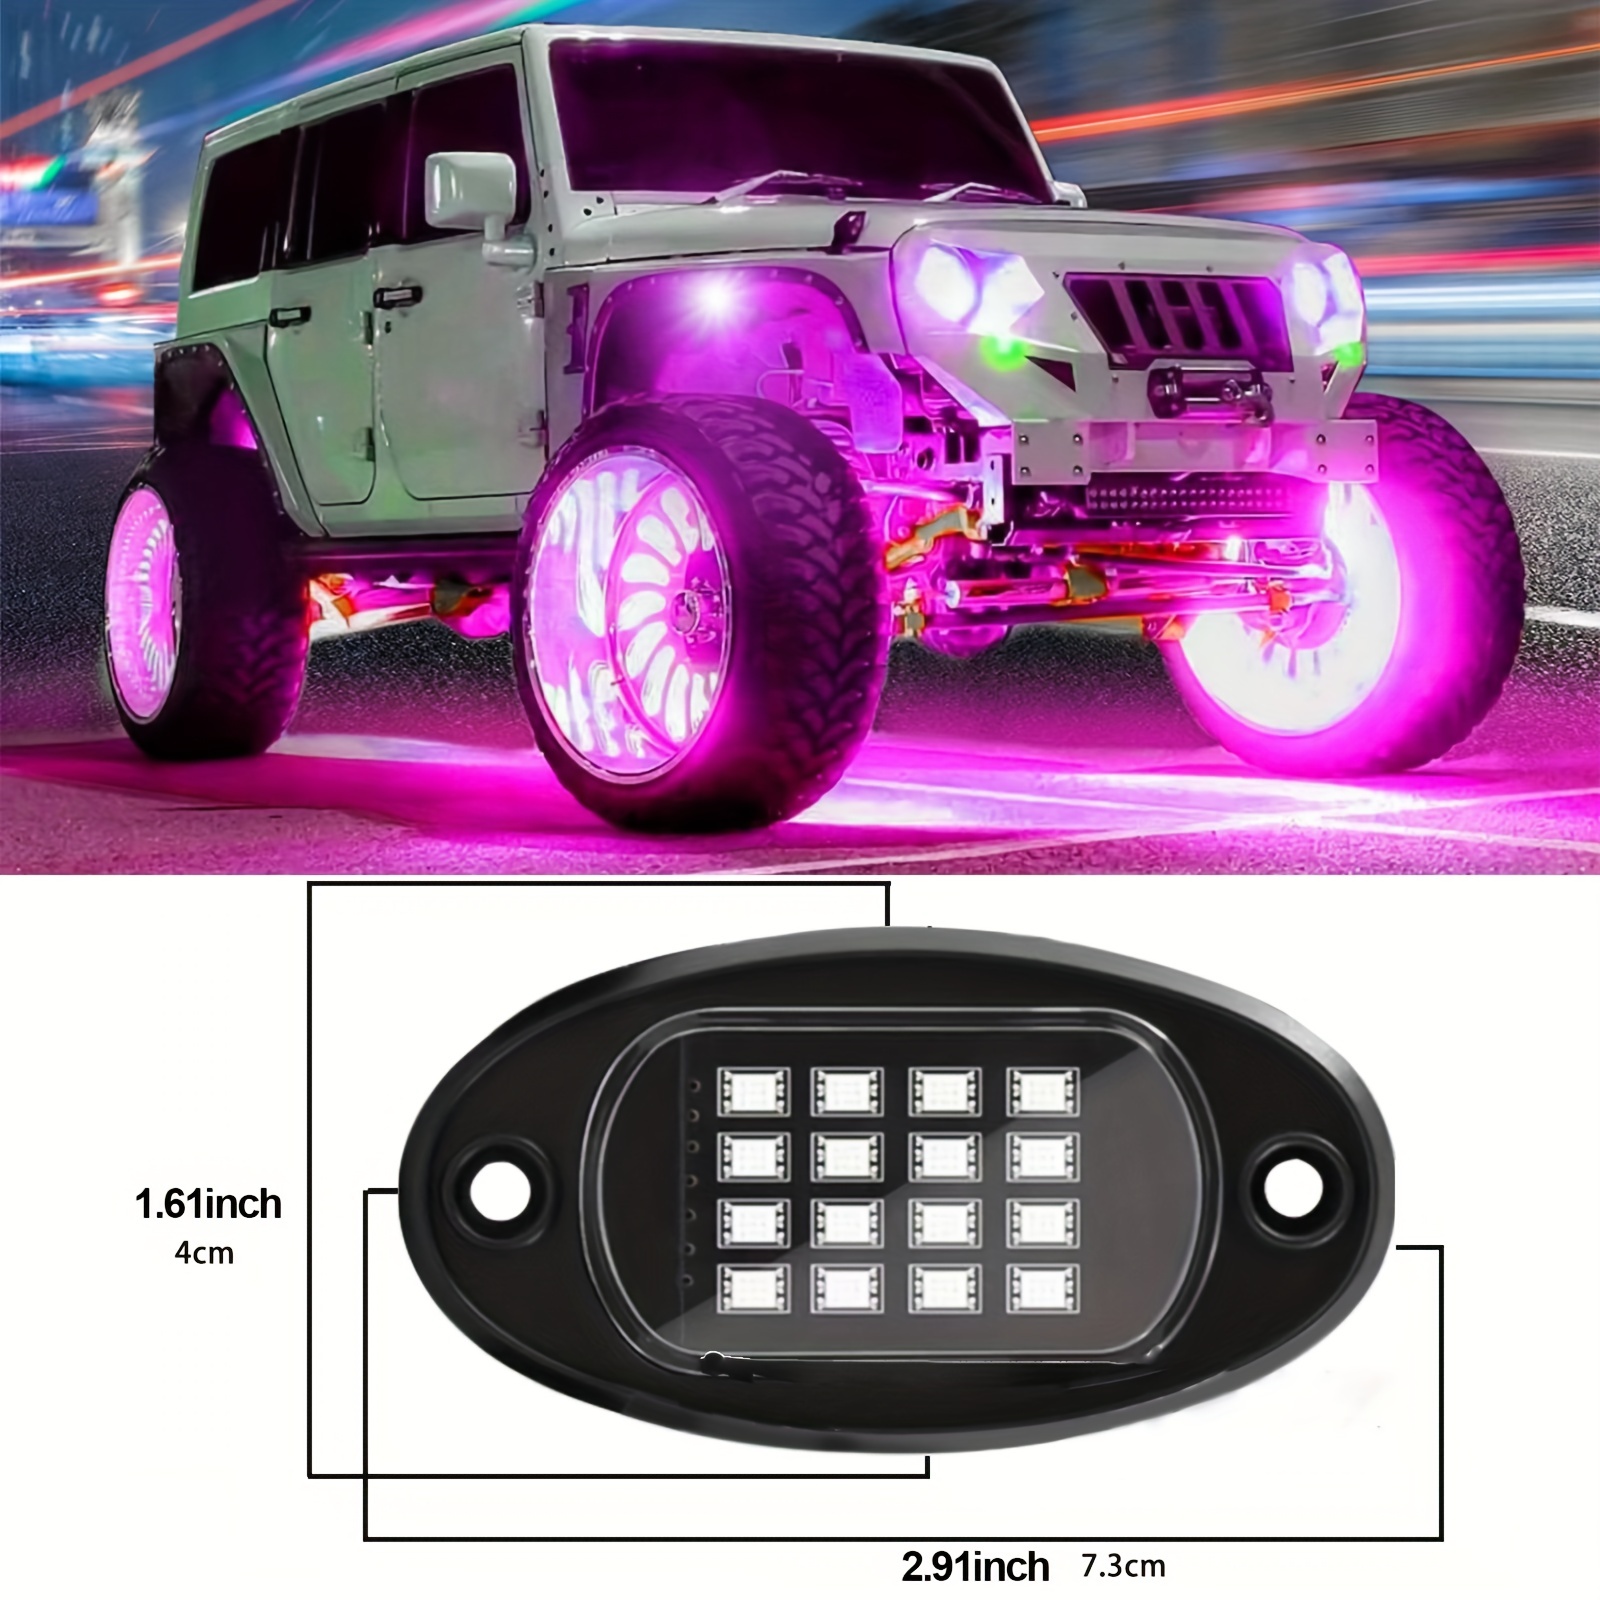 Light Up Your Ride: 6 Pods RGB LED Rock Lights - Waterproof Neon Underglow  Lights with App/Music Mode for Trucks, Jeeps, SUVs, and ATVs